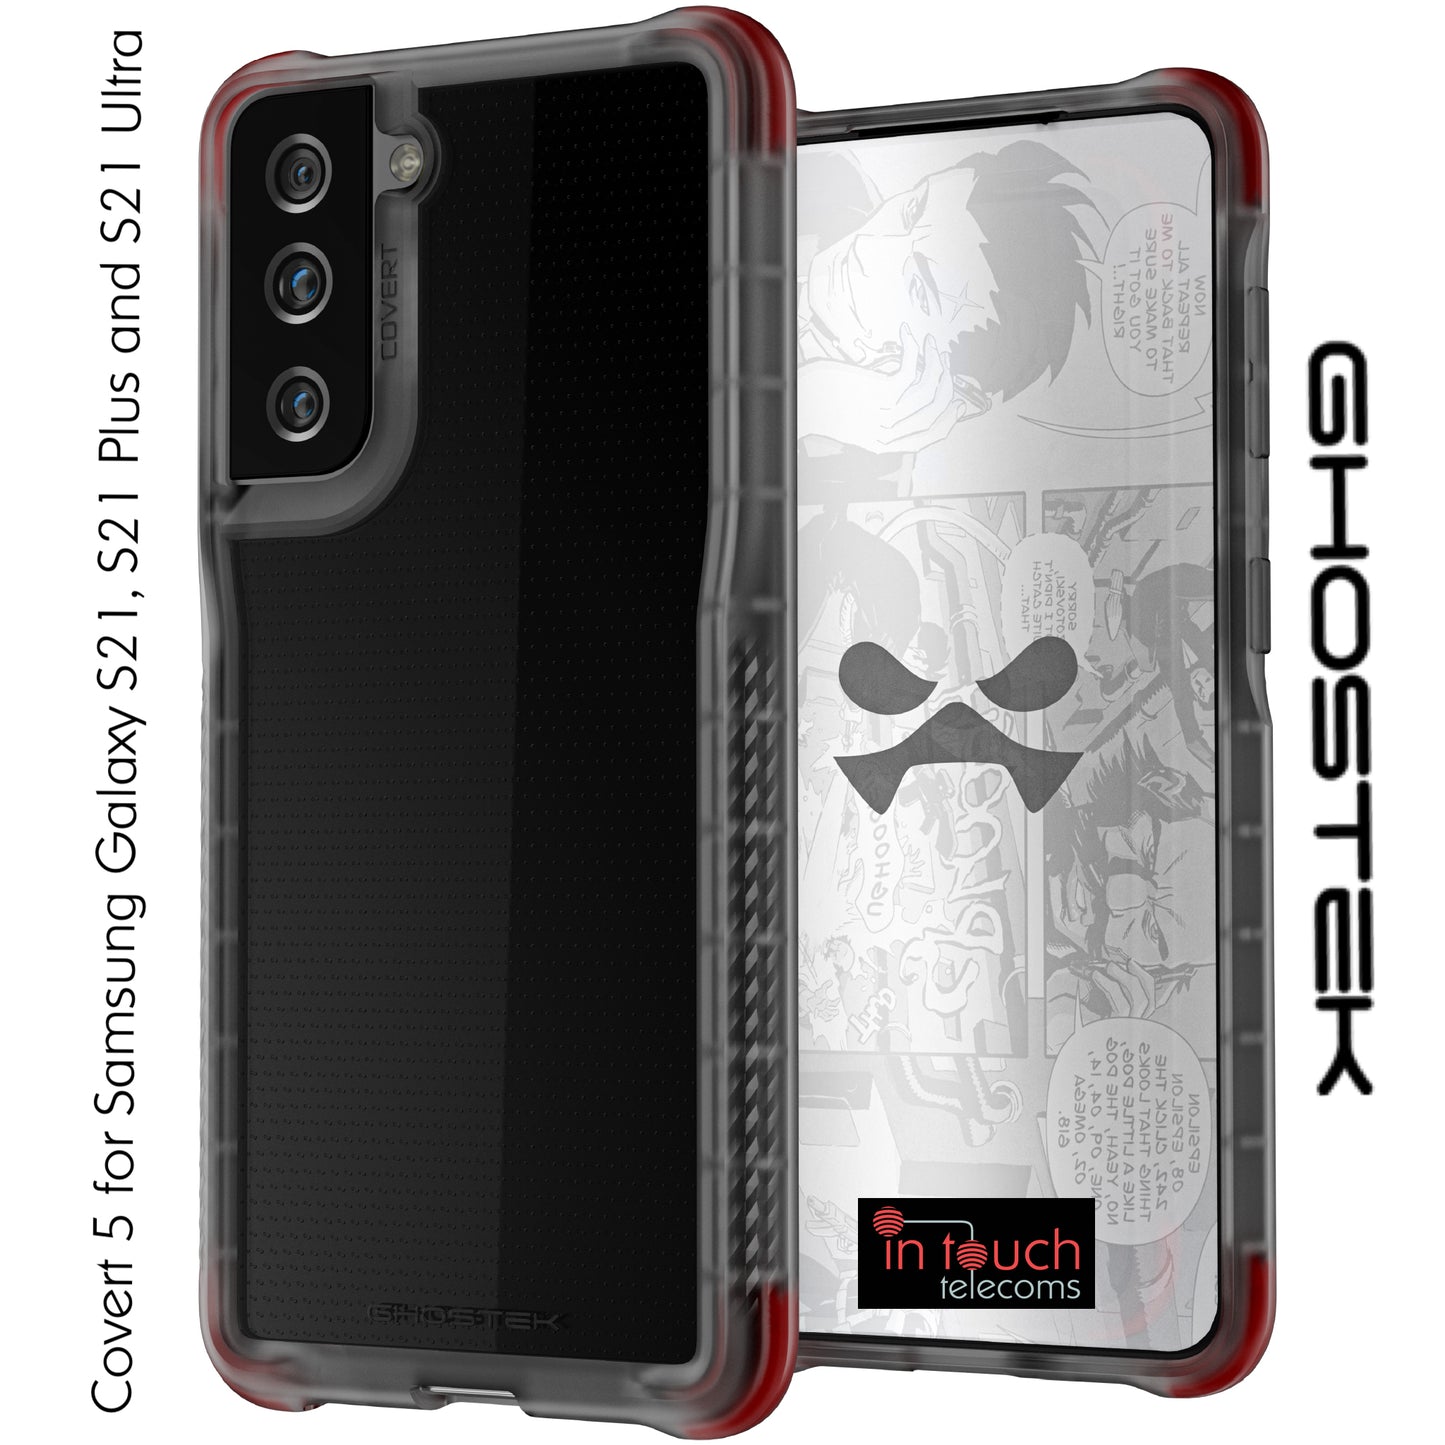 Ghostek Covert 5 Case for Samsung Galaxy S21+ | Military Grade